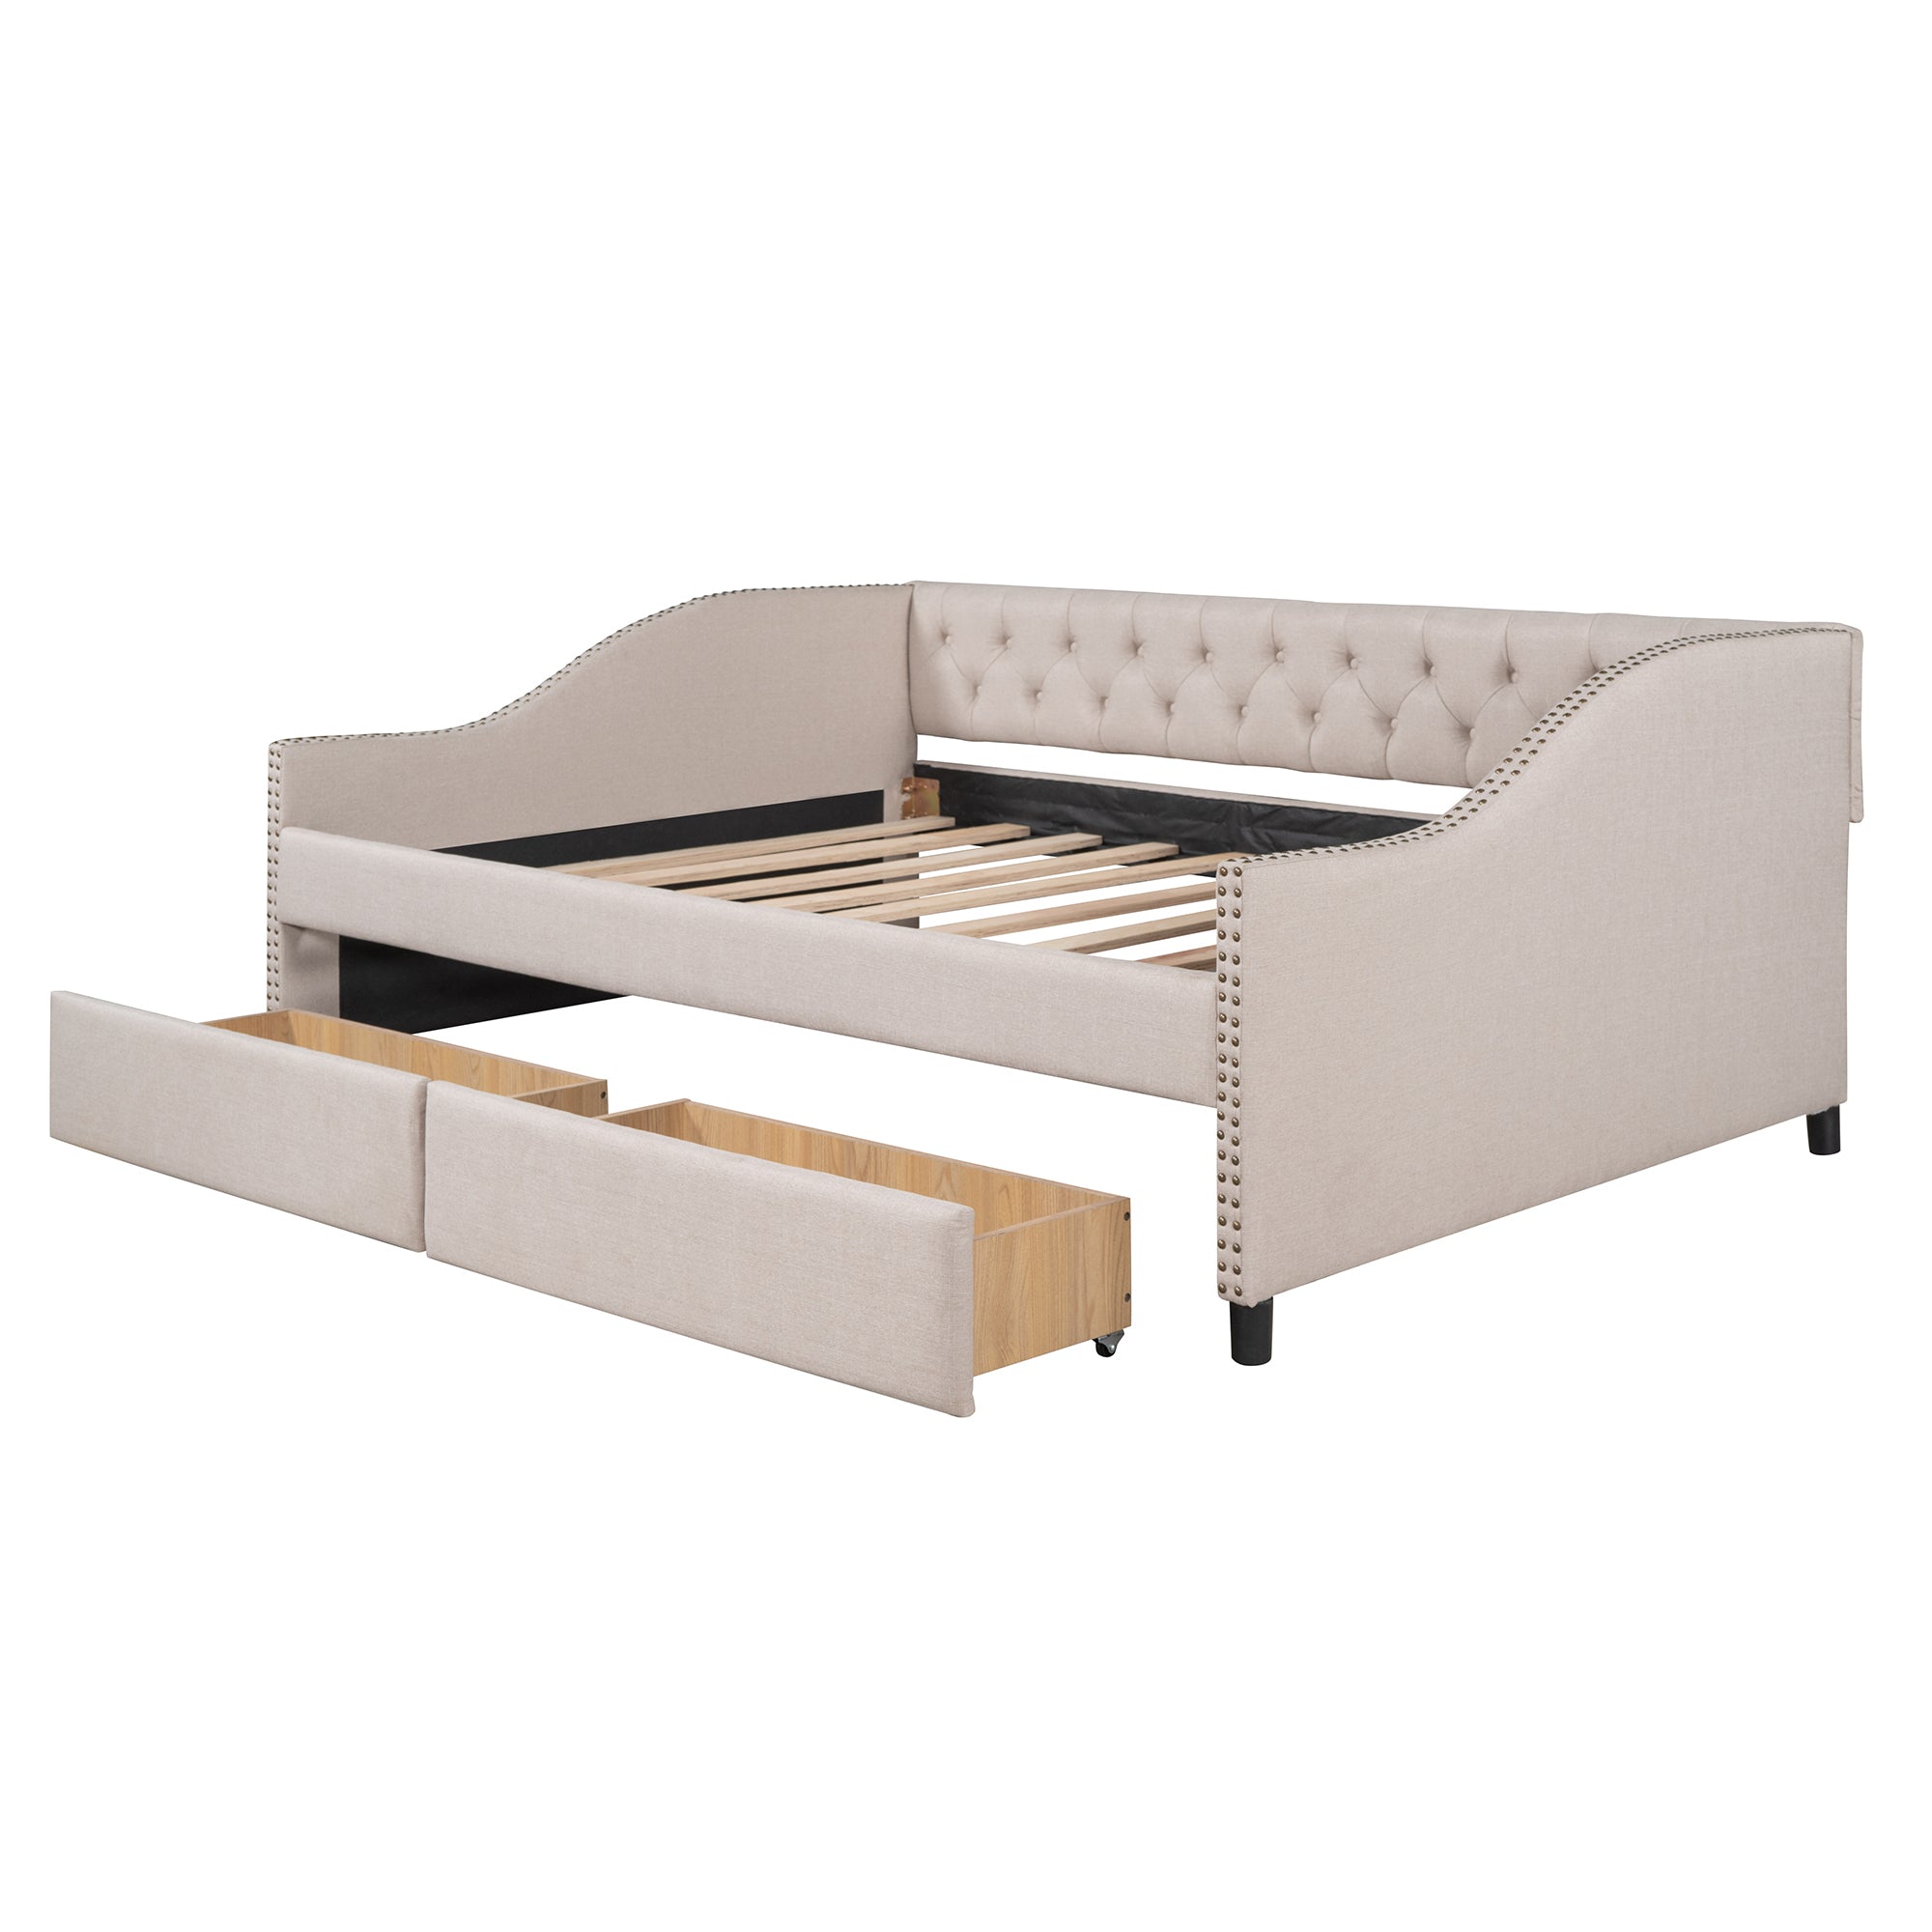 Upholstered daybed with Two Drawers, Wood Slat beige-solid wood